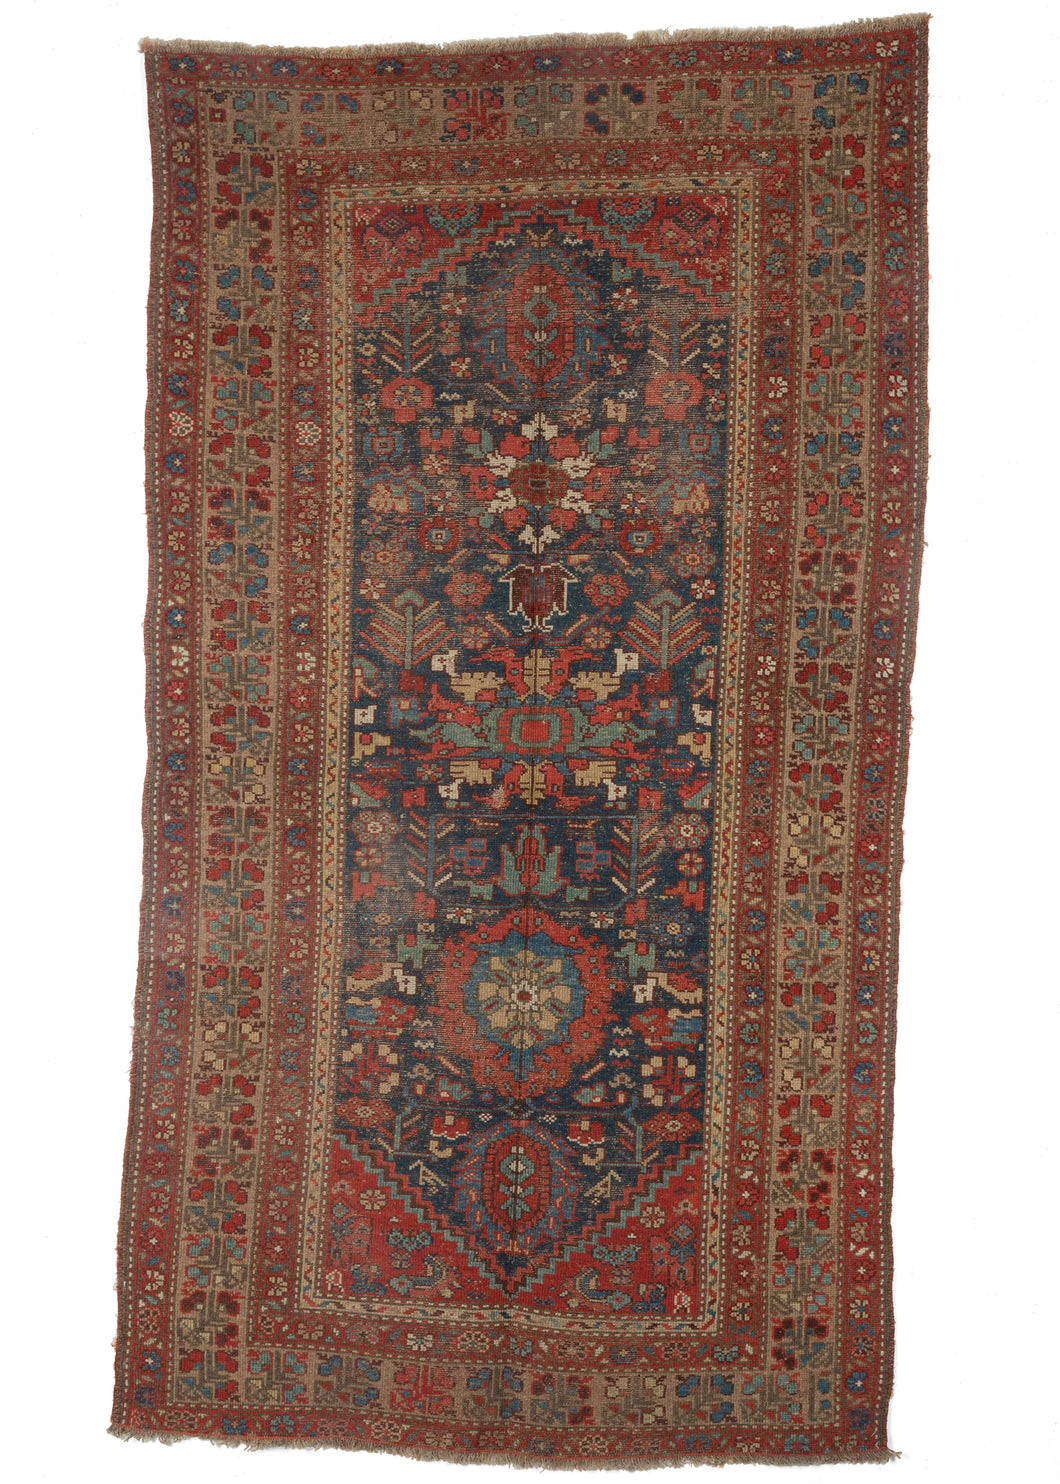 Antique NW Persian Scatter Rug or small runner size with nnantural dyes and floral borders